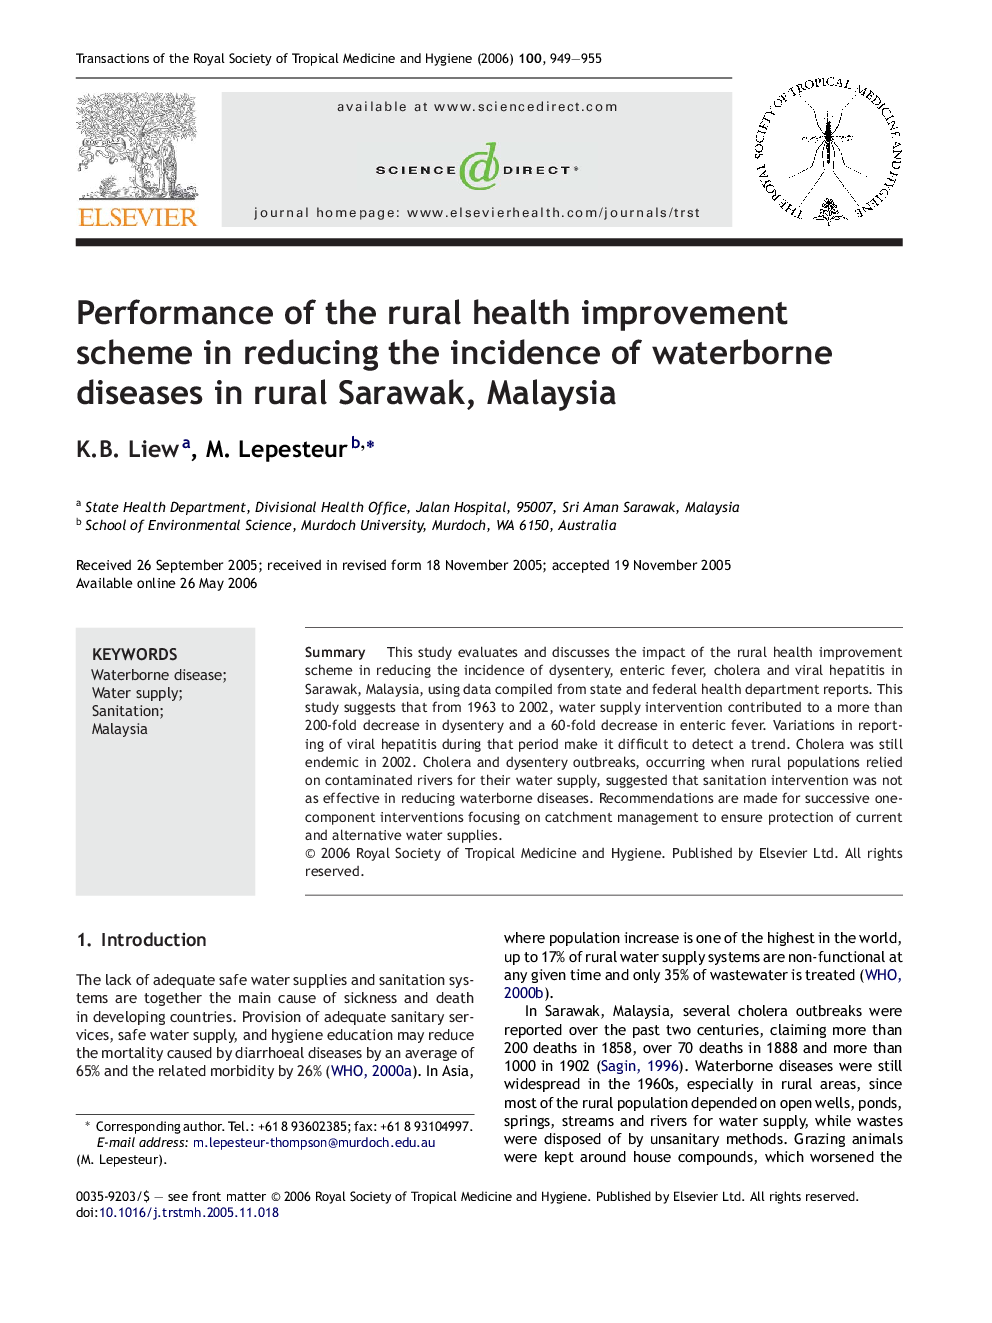 Performance of the rural health improvement scheme in reducing the incidence of waterborne diseases in rural Sarawak, Malaysia